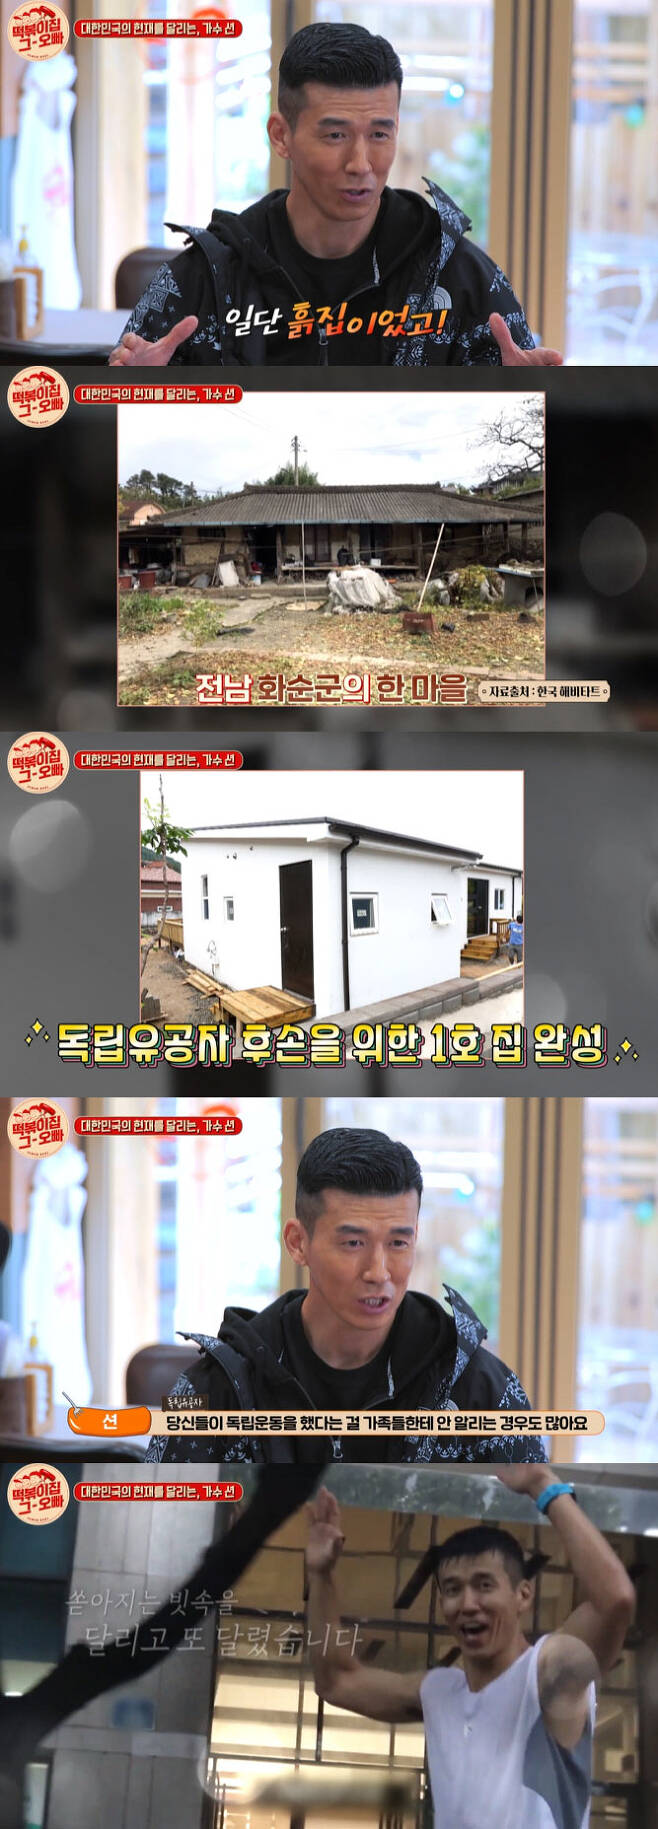 MBC Everlon Tteokbokki house brother broadcast on the last day was with special guests in the Samil day.Sean, who runs 81.5km for independent meritorious people, Kim Gemma, a Korean lecturer who recalled the meaning of resistance literature, and Daniel Alberto Fujimoris extraordinary love of Korea made the three days shine even more.Sean, a native of South Koreas first-generation hip-hop group Jean, is presenting warm warmth throughout the country with steady donation activities.One of the new donations he started in 2020 was to build a new home for the descendants of independent meritorious people, Sean recalling the time of donation on August 15, 2020, when he completed 8.15km 10 times, saying, My body was hard, but I was so happy when it was over.Sean, who said more than 300 million people were raised in 2020 and more than 800 million people in 2021, said he is still doing house gifts for the descendants of independents.I have built three houses now, and I am building a house, he said. In the case of the first house, I saw the picture first before I fixed it.My grandmother was in a wheelchair because she was old, and my son had a little disability, so I built the house beautifully without a threshold. The first house was inspired by the fact that the granddaughter of Kim Yong-sang, who raised funds for independence, and the second house was presented to the granddaughter of Choi Duk-joo, who was arrested while distributing the Taegeukgi and the Declaration of Independence during the Gangjin 4.4 Independence Movement Movement, and the third house was presented to the granddaughter of Lim Chul-jae, who exercised 4.5 Cheongyang settlement.Asked if he would continue the donation run, Sean said, It was not the original. The descendants of the independents who built the first house and lived there were so grateful that they were tearful.So I said, Ill build it up to 100 in front of it. I do not do it alone, but I think it is more meaningful that everyones heart, such as the people who jumped together, and the heavy tart, has become one.Regarding the criteria for selecting descendants of independent beneficiaries who build houses, There is no standard, but it is not easy to find them.Because they often do not inform their families that they have been doing independence movements, they had to keep the independence movement completely secret without knowing their families.There were some people who died. The family did not know, but later they learned about their achievements through documents. Sean started donation Marathon because of the heartbreaking reality of the descendants of the national meritorious people.Because many descendants of independent meritorious people who were arrested during the long-term movement or who died while enduring the brutal torture of the Japanese imperialism were not living in a proper environment.Sean expressed his patriotism, saying, I have Taegeukgi in my heart all over the country and I am playing with gratitude for the independence merits.The resistance literature of the era, which thought only about the independence of the country during the Japanese colonial period, also sounded the hearts of viewers.On this day, literary lecturer Kim Gemma recounted the meaning of the Three Days by explaining the works of those who expressed their hot will with pens and paper for the independence of the country such as Han Yong-woon and Yun Dong-ju.Kim Jong-min and Lee Yi-kyung recalled the era by reading the Korean representative resistance poems such as Han Yong-woons I do not know and Yun Dong-jus Easy written poem starting with the Declaration of Independence.Kim Gemma said, I hope viewers and students will think about their lives. There is today because they were there. There is no future for a nation that has forgotten history.The last guests were Daniel and Alberto Fujimori.Those who have been living in Korea for 15 years have expressed their deep knowledge of Korea and their special affection for Korea.Kim Jong-min and Lee Yi-kyung admired Daniels knowledge of the background and history of the Samil Festival without hesitation.There was also a praise for the history of Korea, which has endured many things.Daniel said, I think it is really great to protect and resist everything during the Japanese colonial period. It does not make sense to have experienced war, division and dictatorship.You can have that much patriotism, he said.Alberto Fujimori also expressed a special affection for Korea.History is also a proud thing, and there are not too many (proud) things like beautiful nature, culture, Hangul, he said.On this day, Tteokbokki house brother celebrated the third day and set up a time to think about the past, present and future of South Korea.Special Donations for the descendants of independence activists From Marathon to the hot history of Korean literature, to South Korea from the eyes of foreigners, the stories that could not be heard anywhere filled the three days of 2022.On the other hand, MBC Everlon Tteokbokki house brother is broadcast every Tuesday at 8:30 pm.